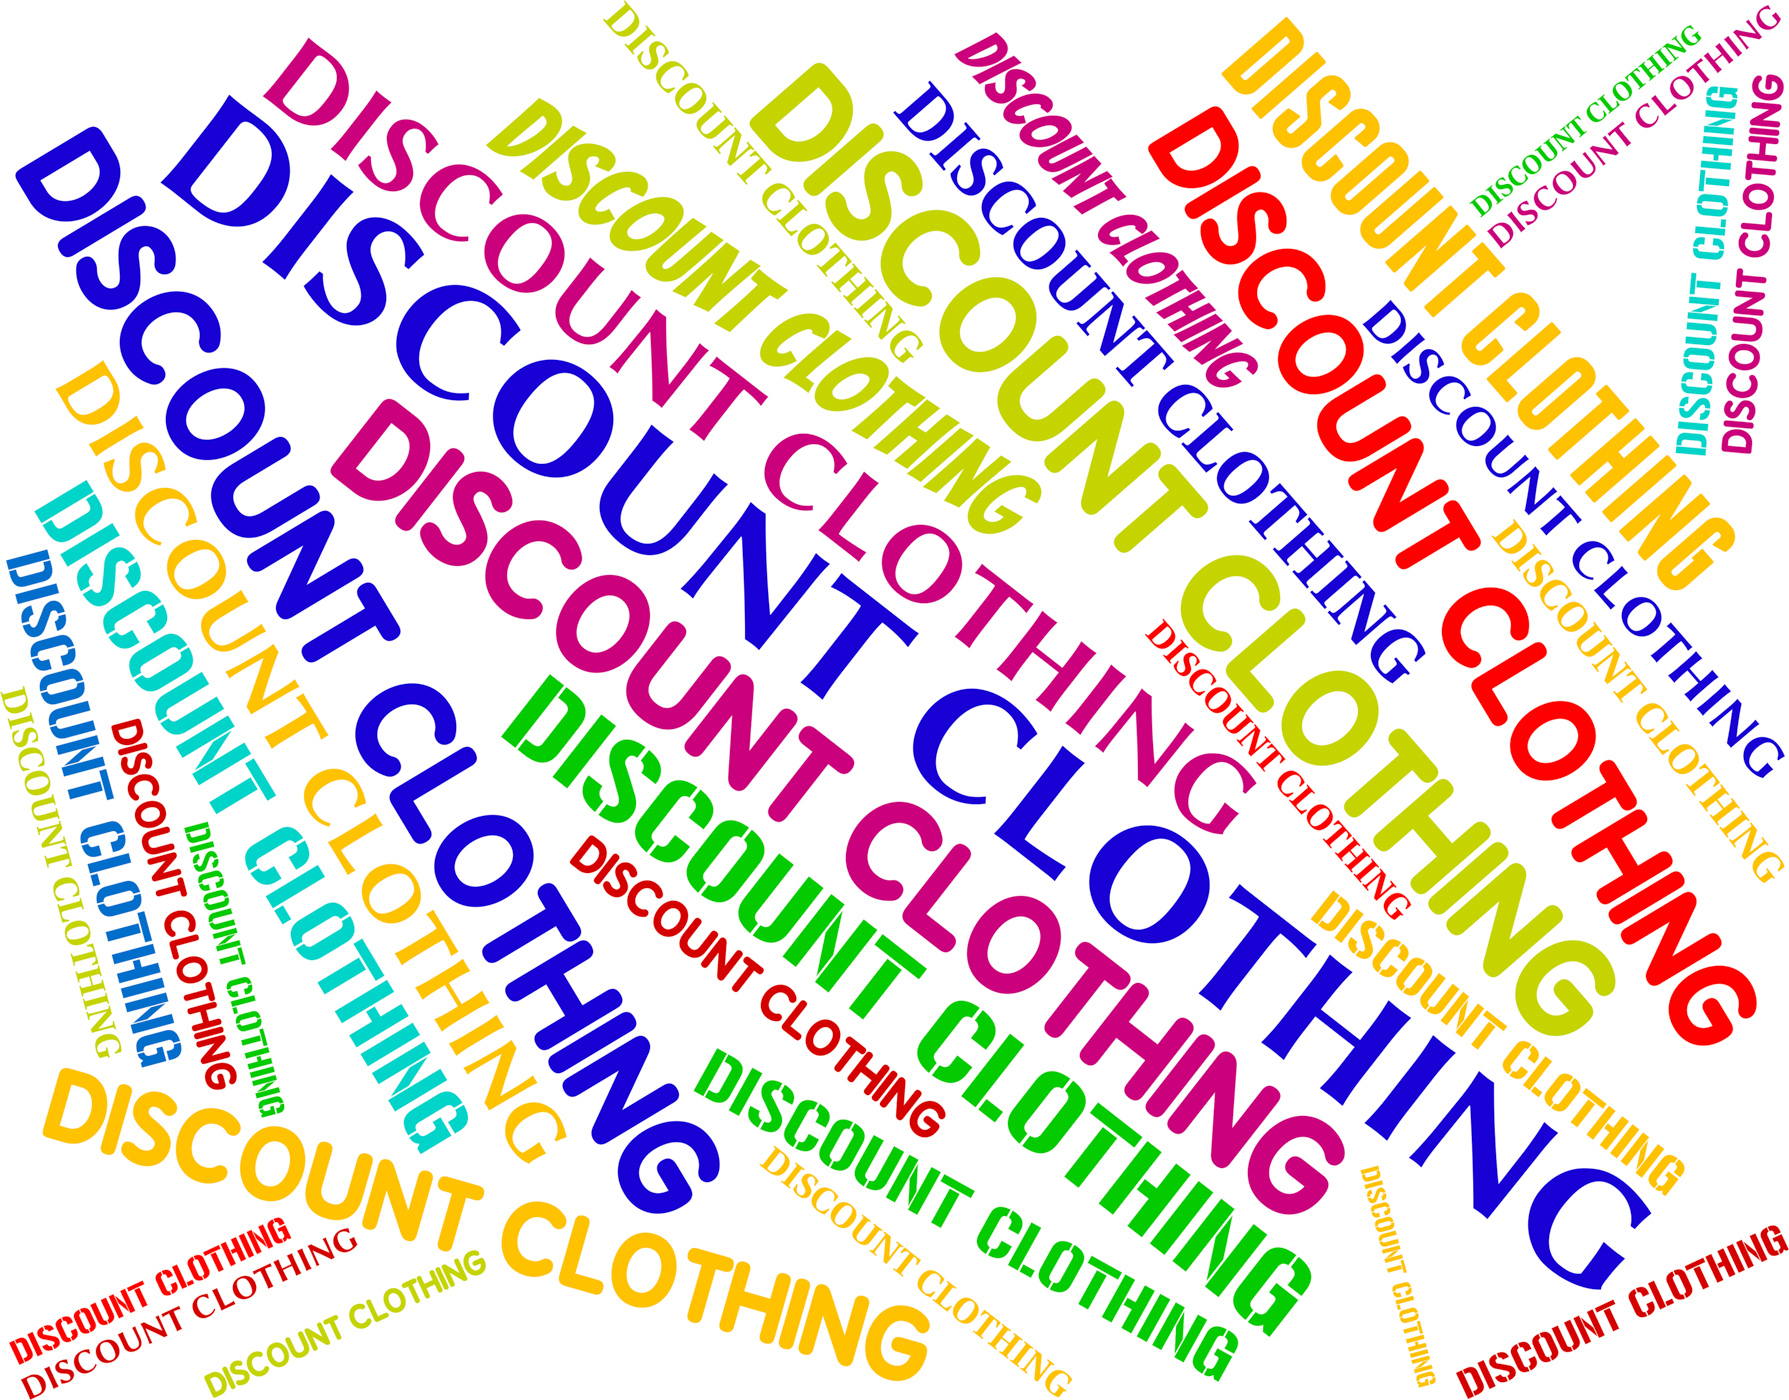 Discount clothing shows garment cheap and text photo